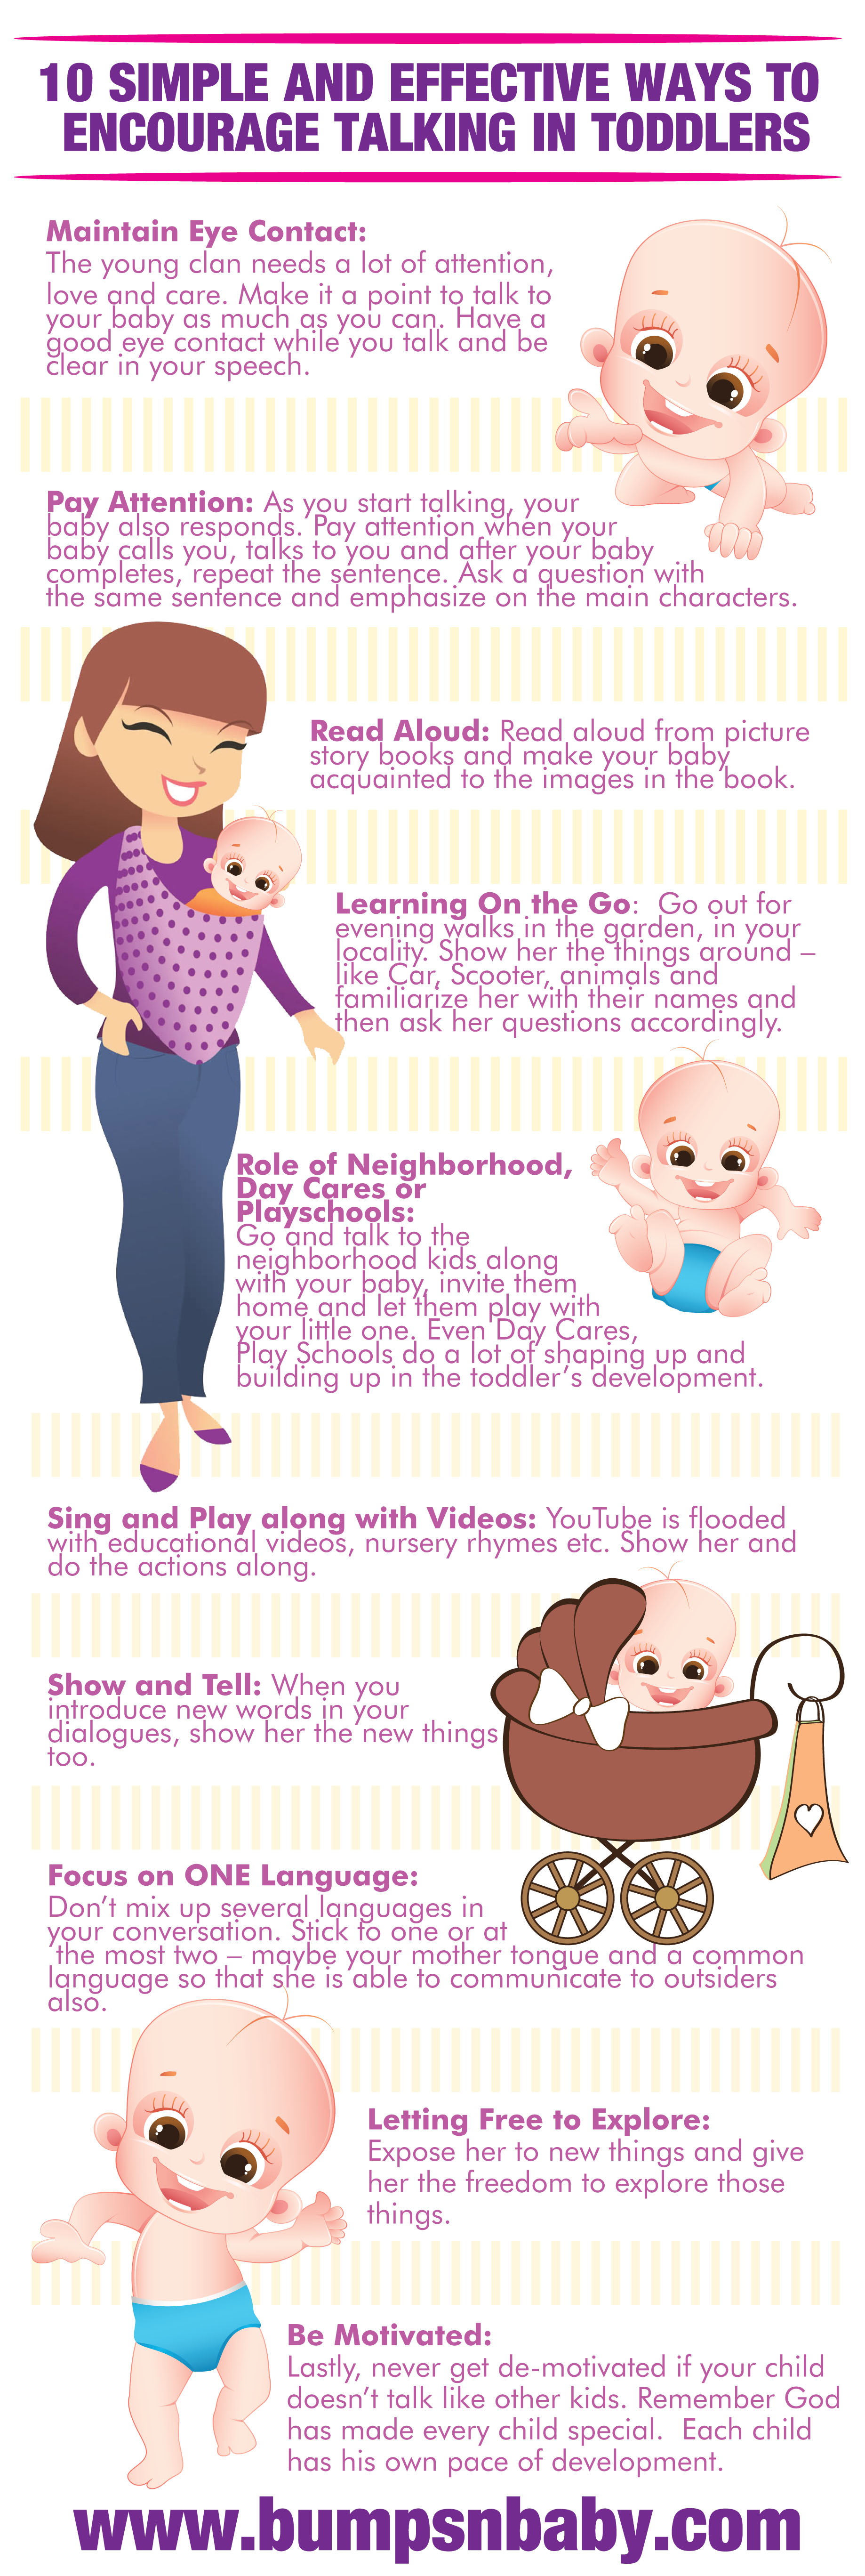 simple and effective ways to encourage talking in toddlers